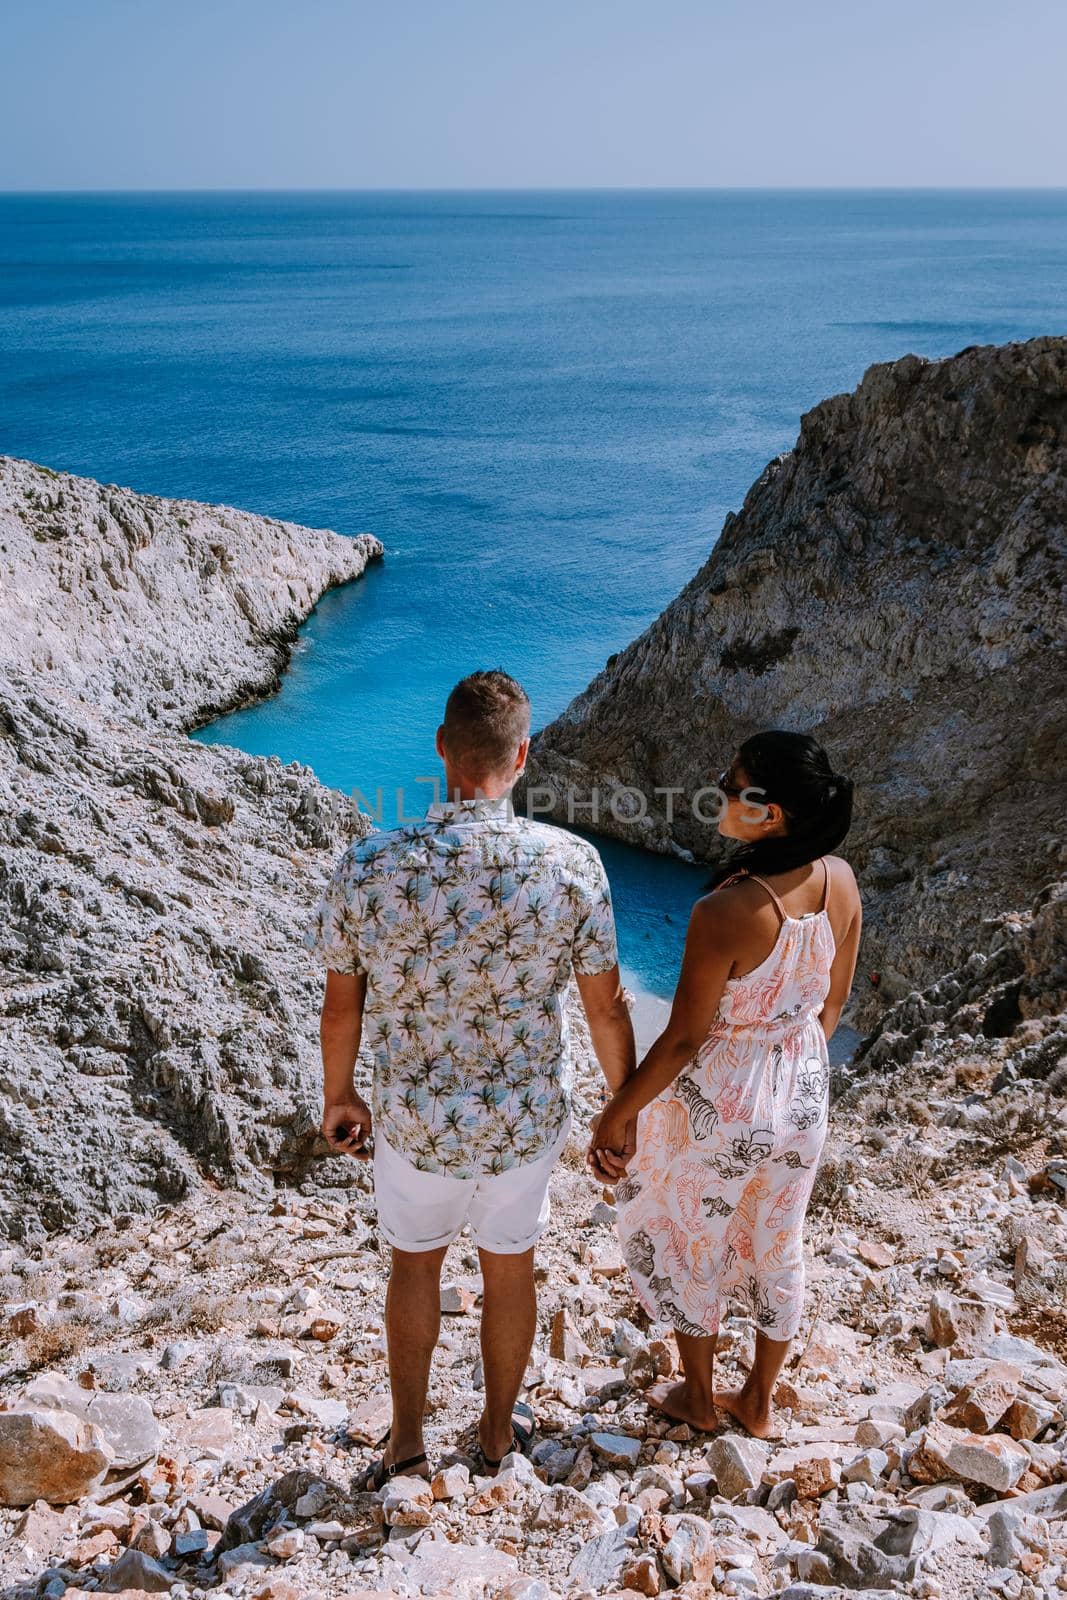 Crete Greece Seitan Limania beach with huge cliff by the blue ocean of the Island of Crete in Greece, Seitan limania beach on Crete, Greece. Europe, young couple mid age on vacation Crete 